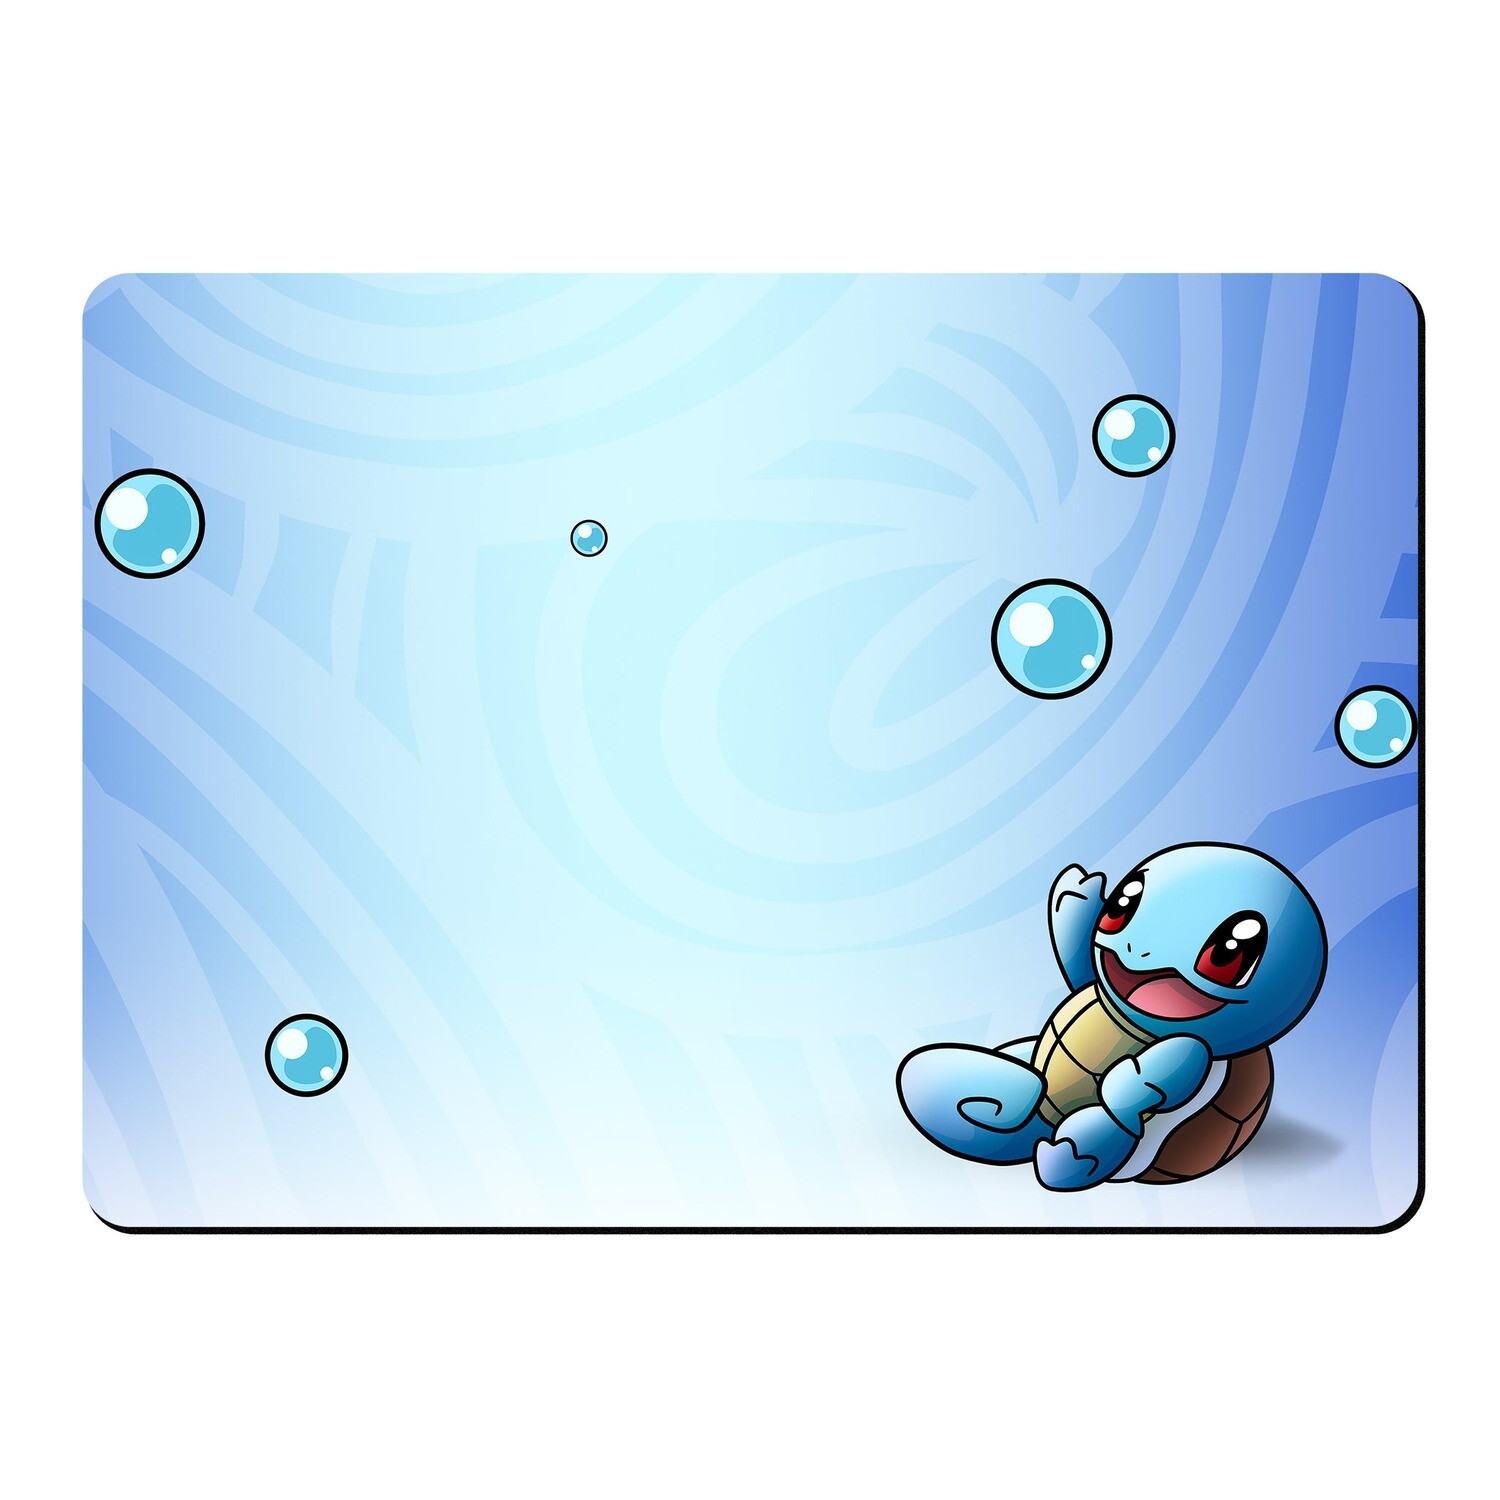 Mouse Mat (Squirtle)